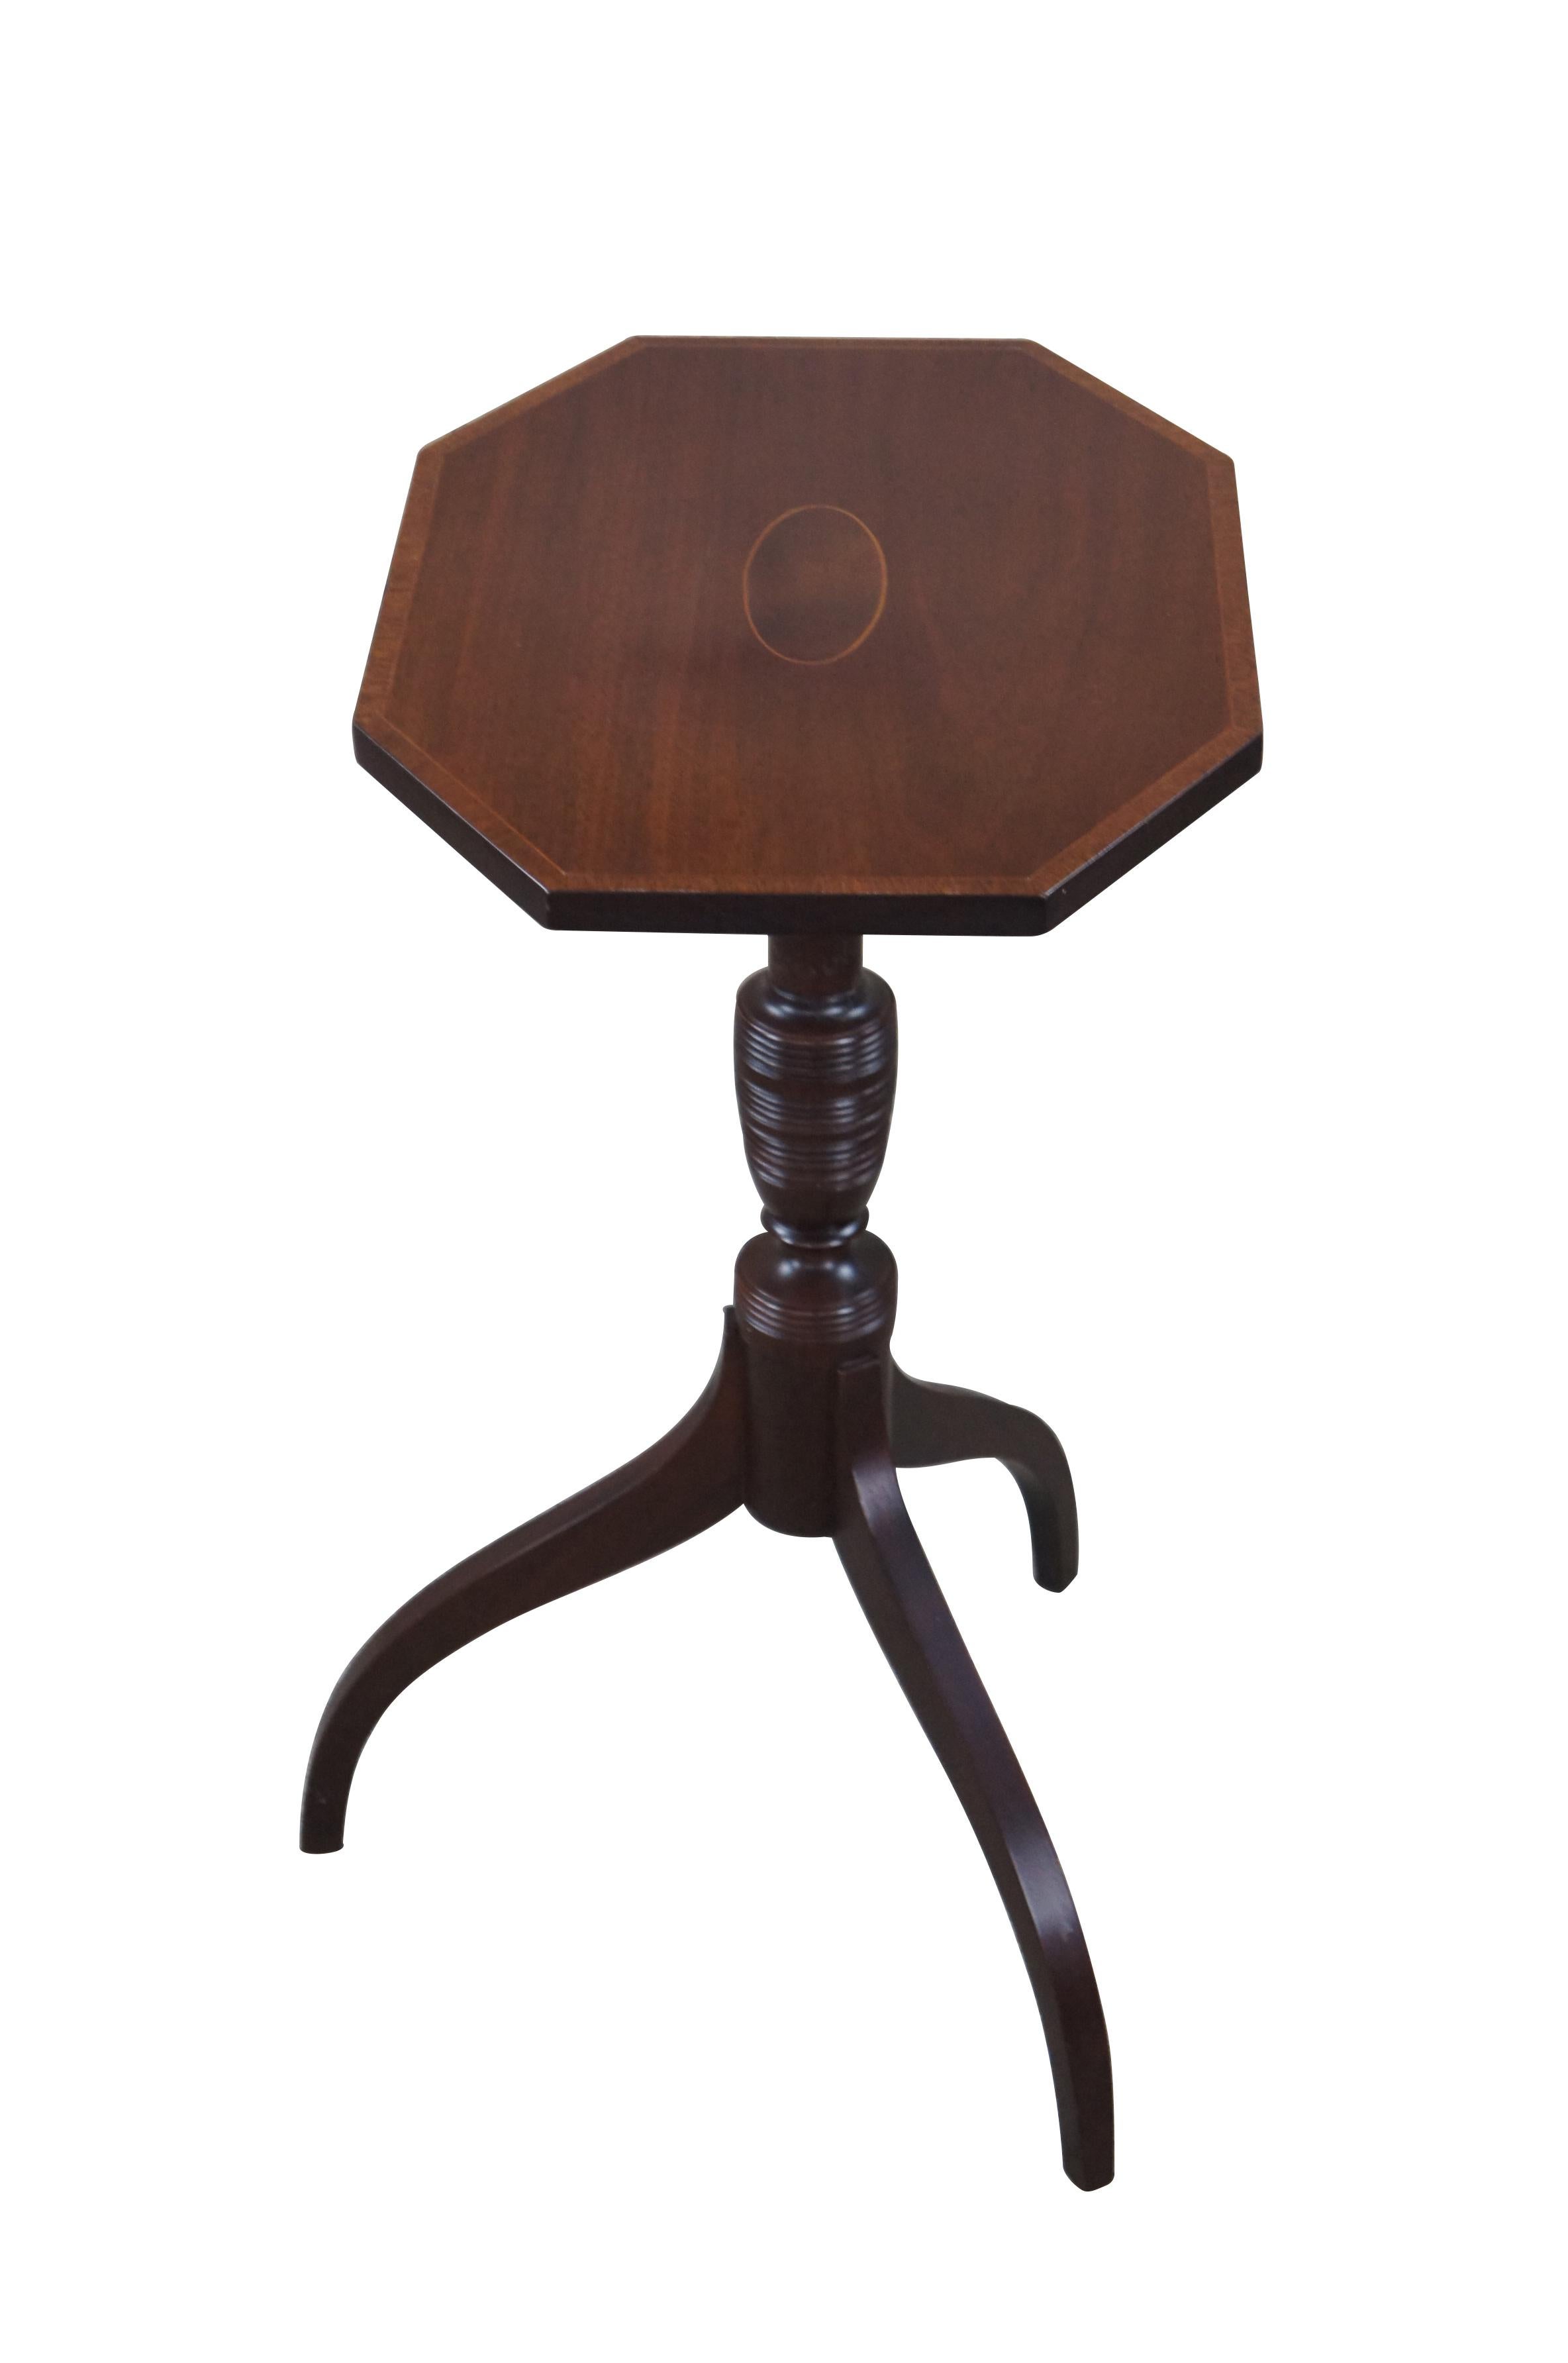 Vintage Biggs Old Sturbridge Village Federal Mahogany Spider Leg Candle Stand In Good Condition For Sale In Dayton, OH